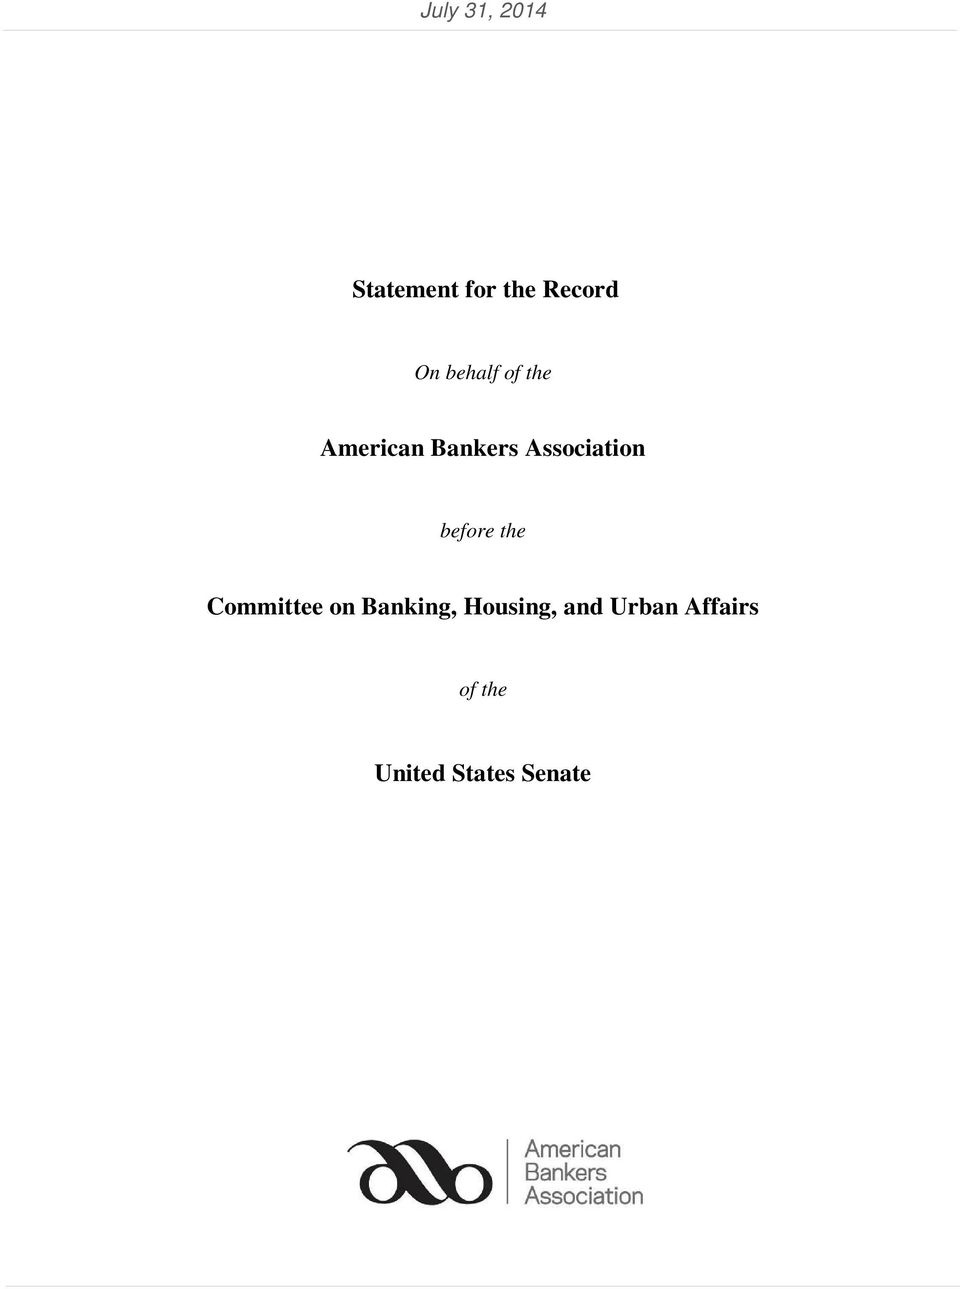 the Committee on Banking, Housing, and